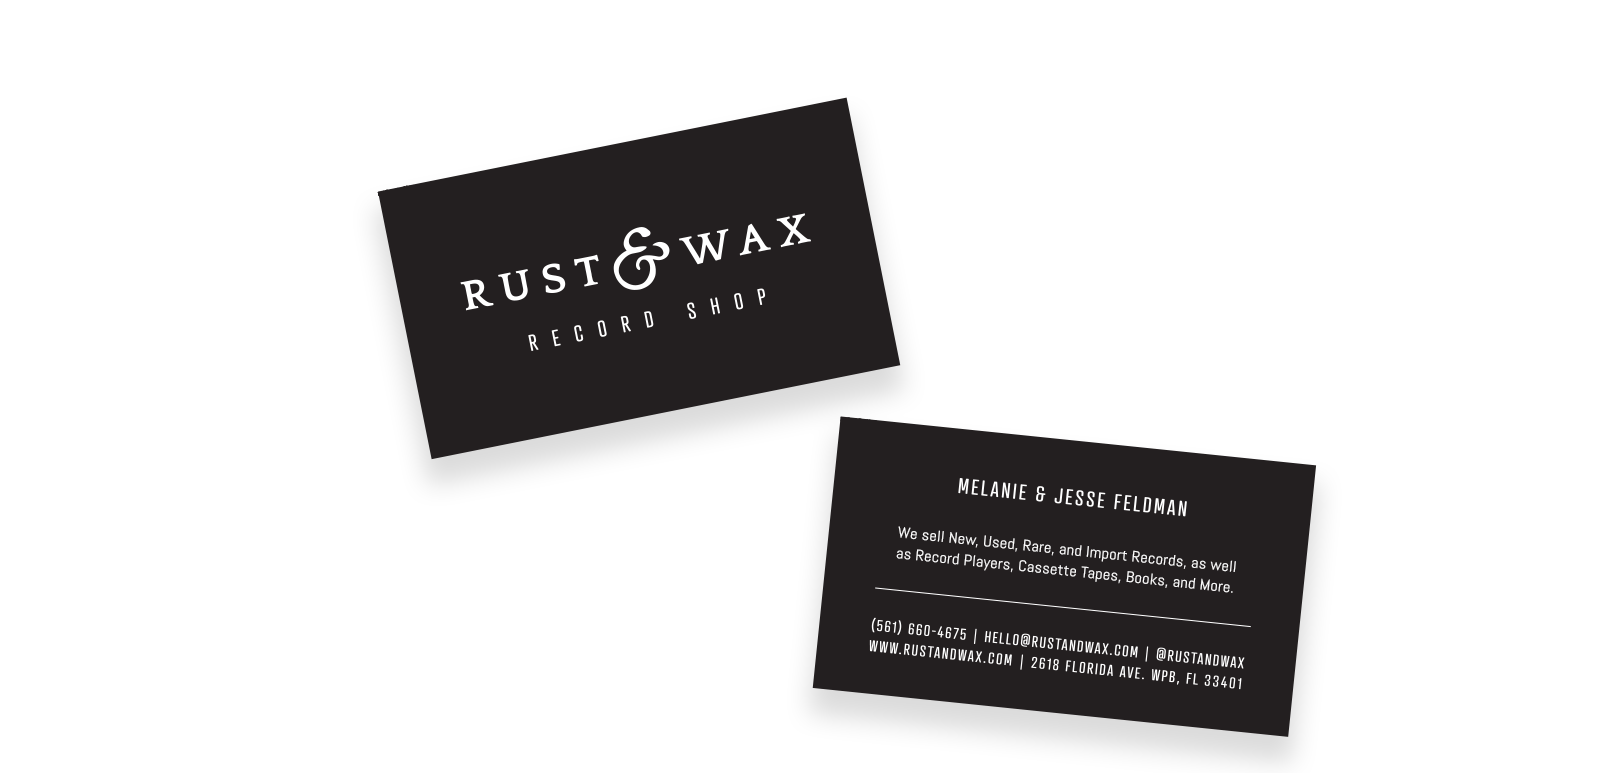 Business card mock-ups featuring Rust & Wax logo in white against a dark charcoal background with a condensed type that reads "Record Shop" underneath. The back of the business card includes the owners names and additional store information.